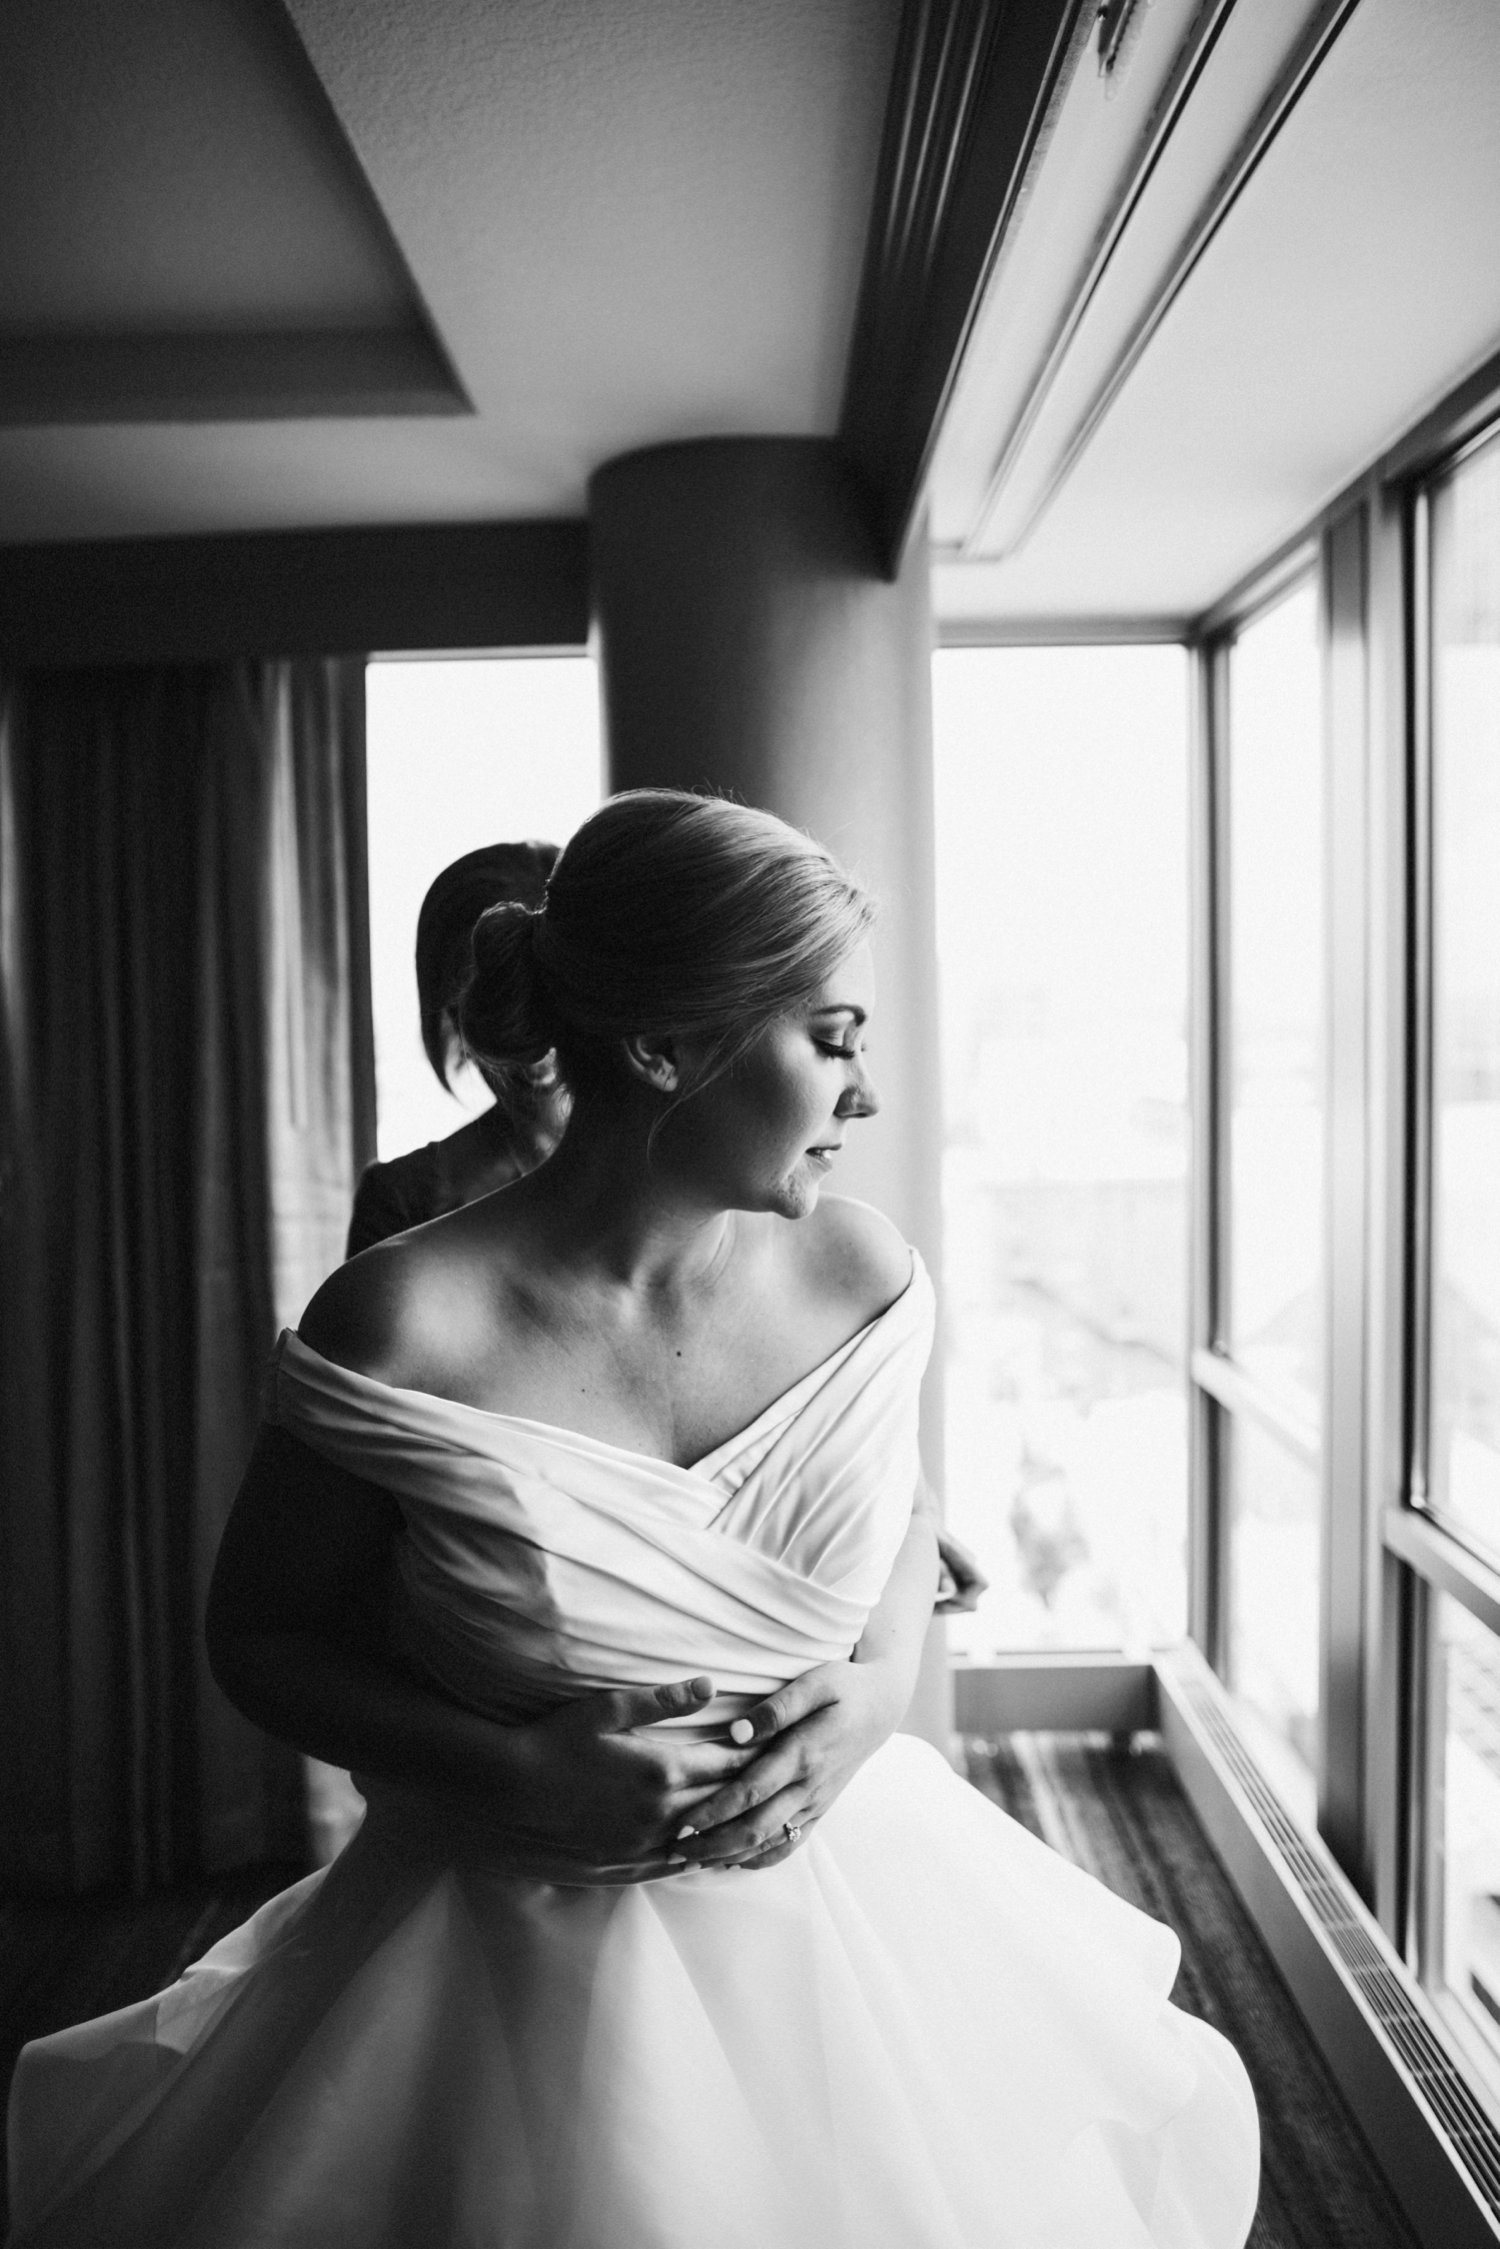  images by feliciathephotographer.com | destination wedding photographer | kansas city | summertime | classic | getting ready | details | black and white | off the shoulder | the gown gallery | putting on the dress | maggie sottero | updo | posh kc | 